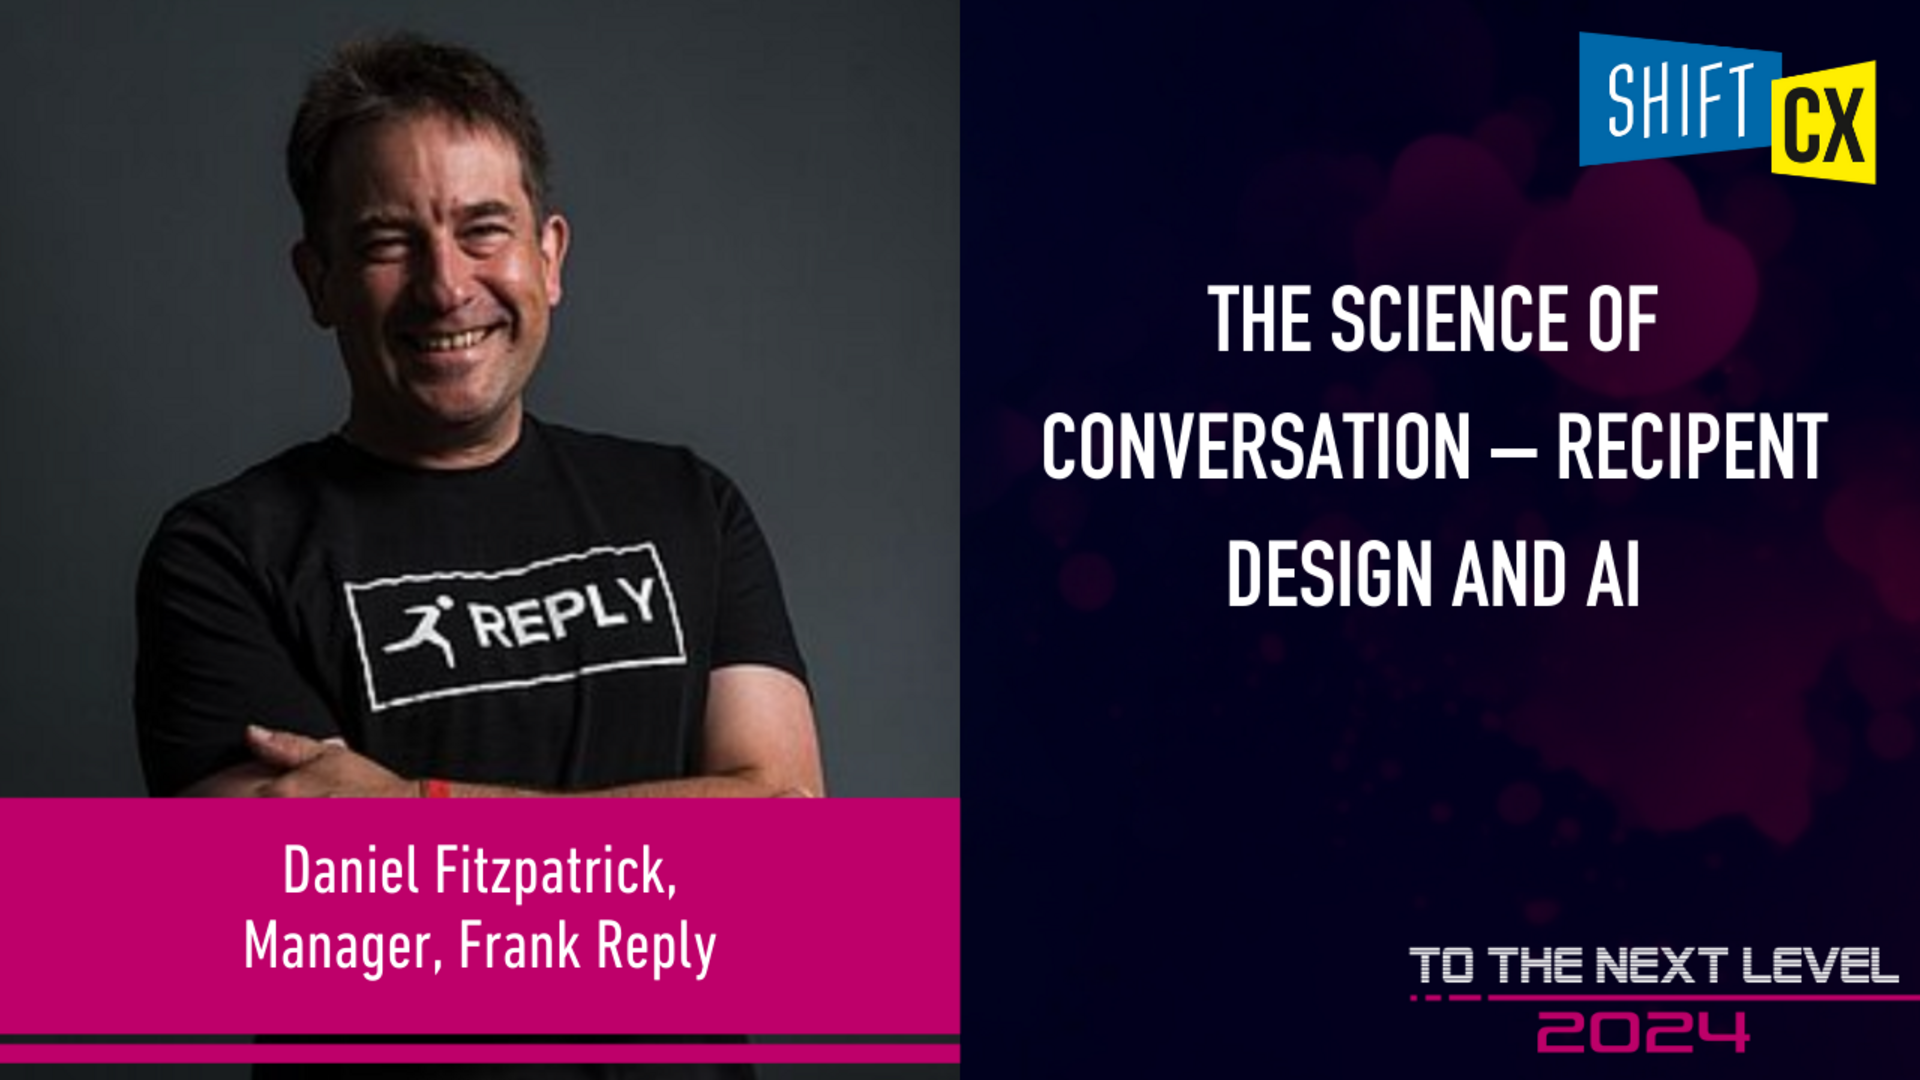 The Science of Conversation – Recipient Design and AI